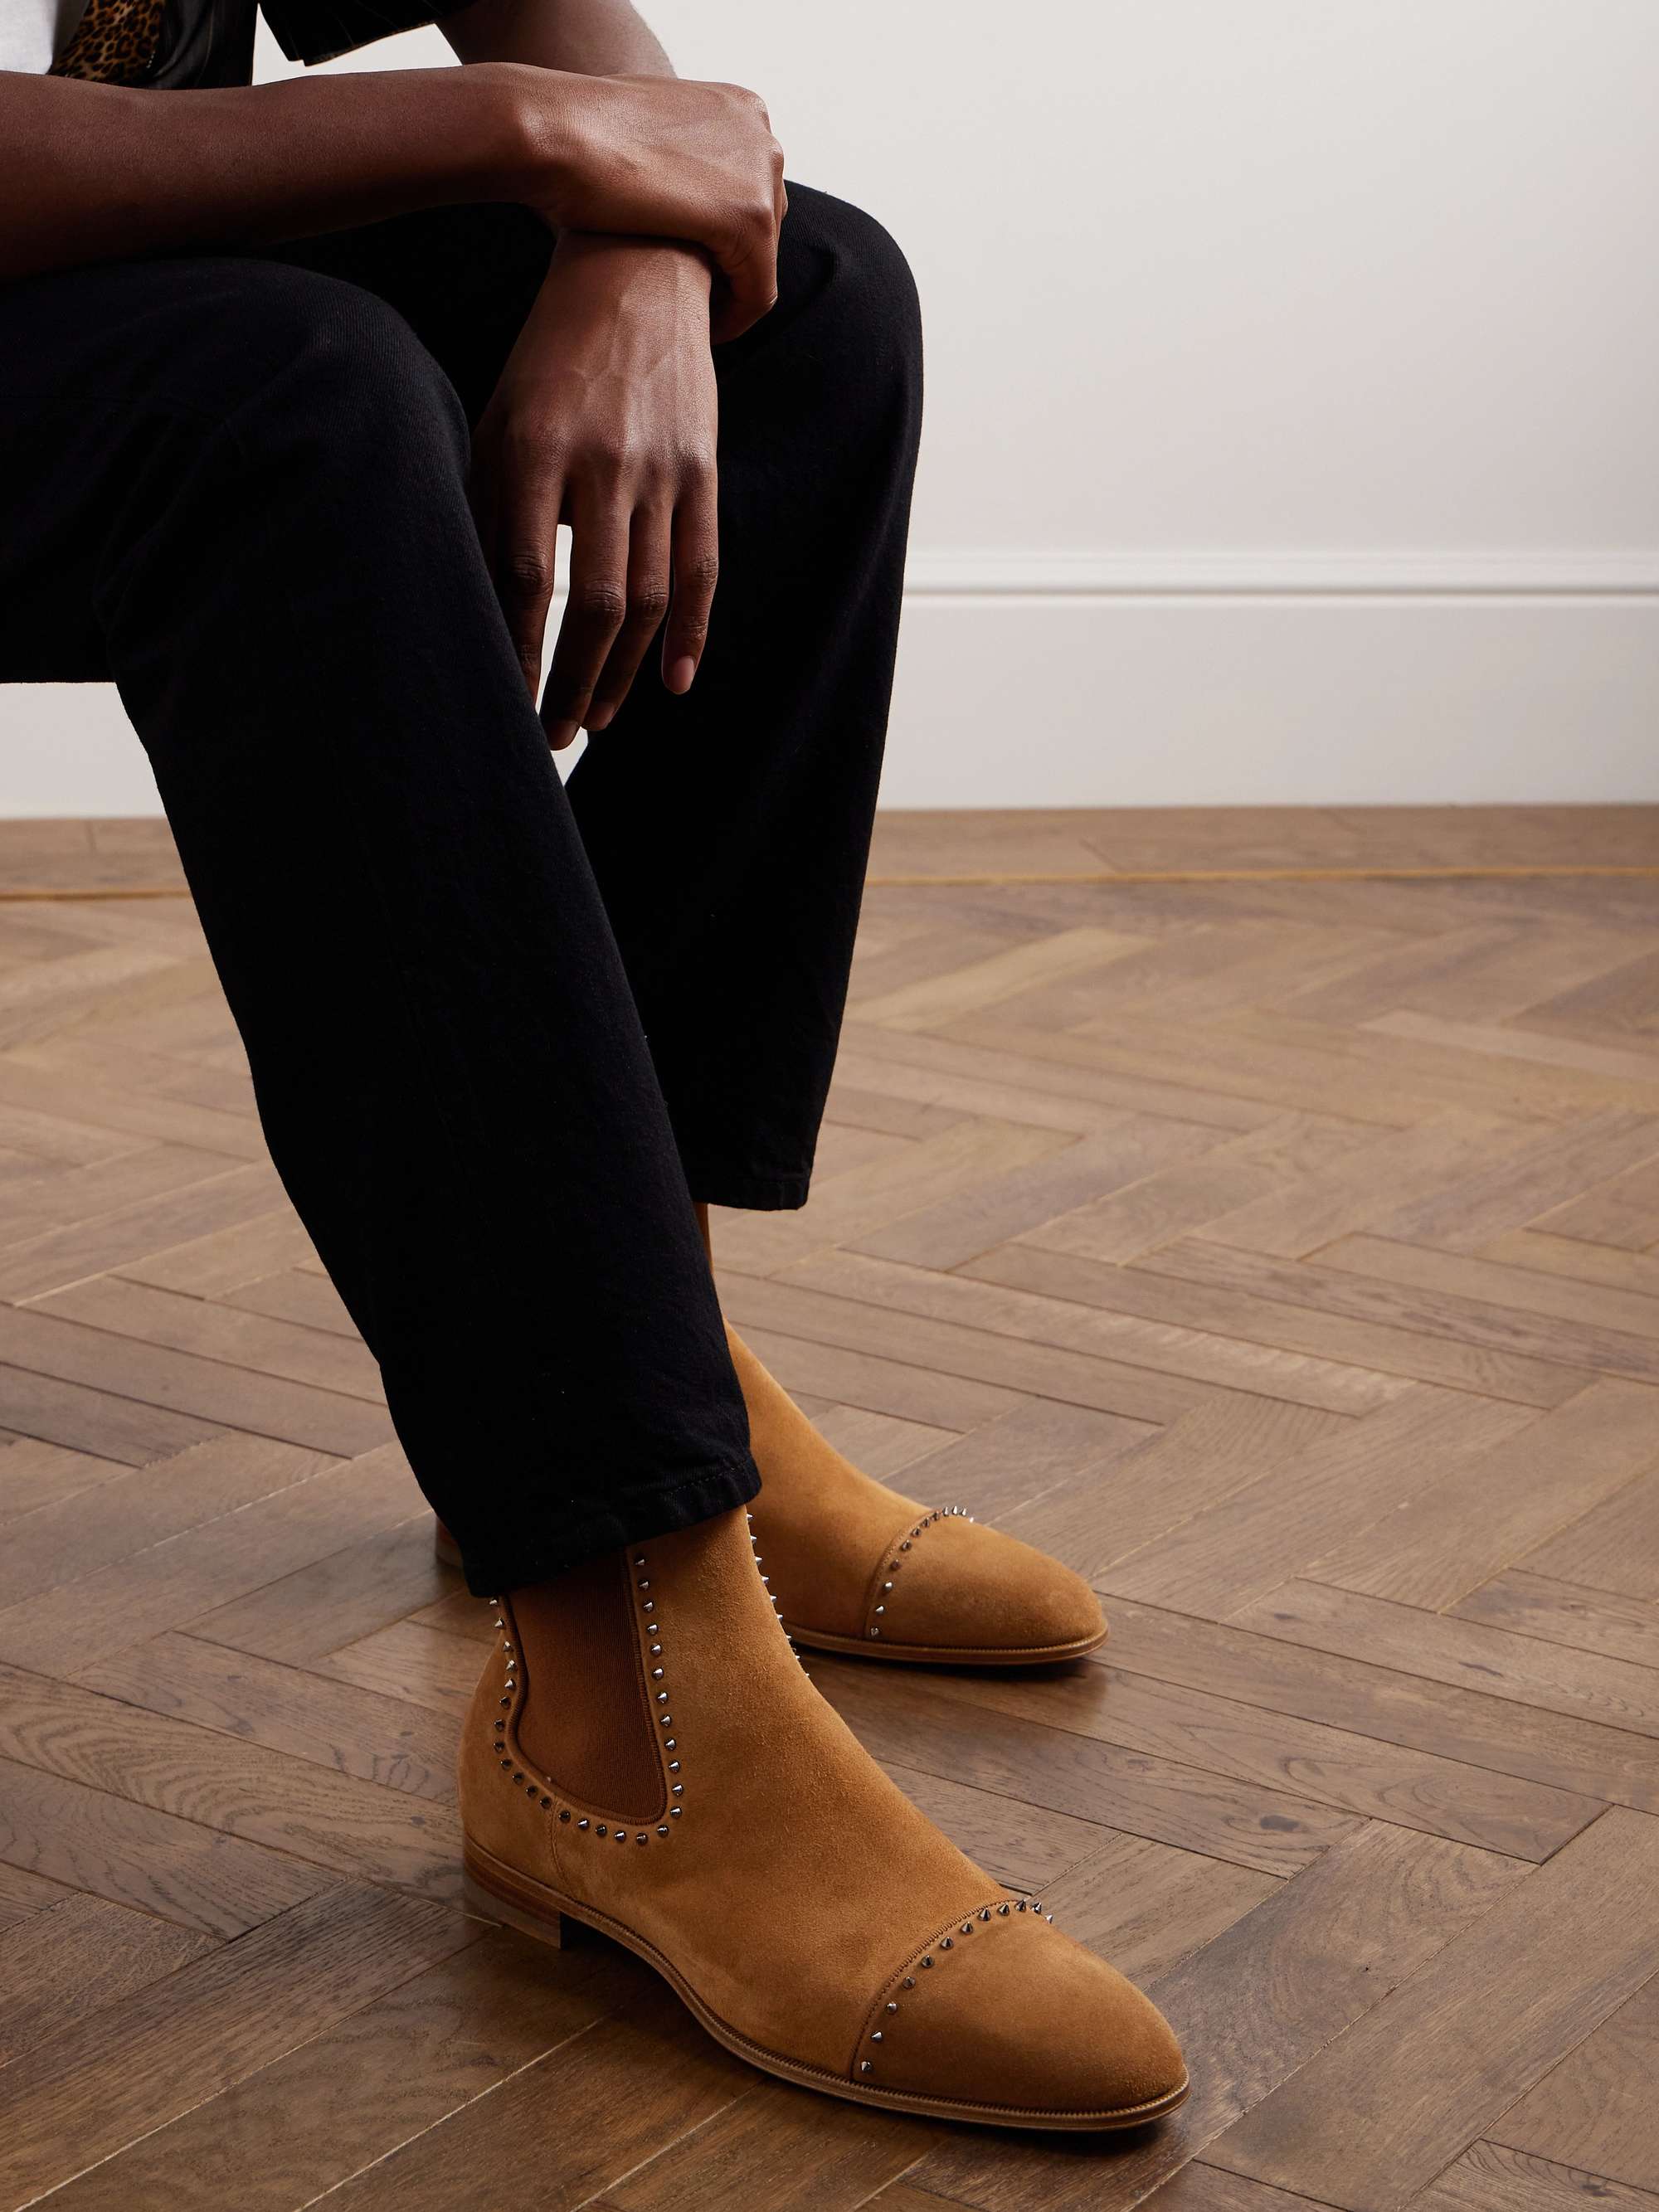 CHRISTIAN LOUBOUTIN Spiked Suede Chelsea Boots for Men | MR PORTER